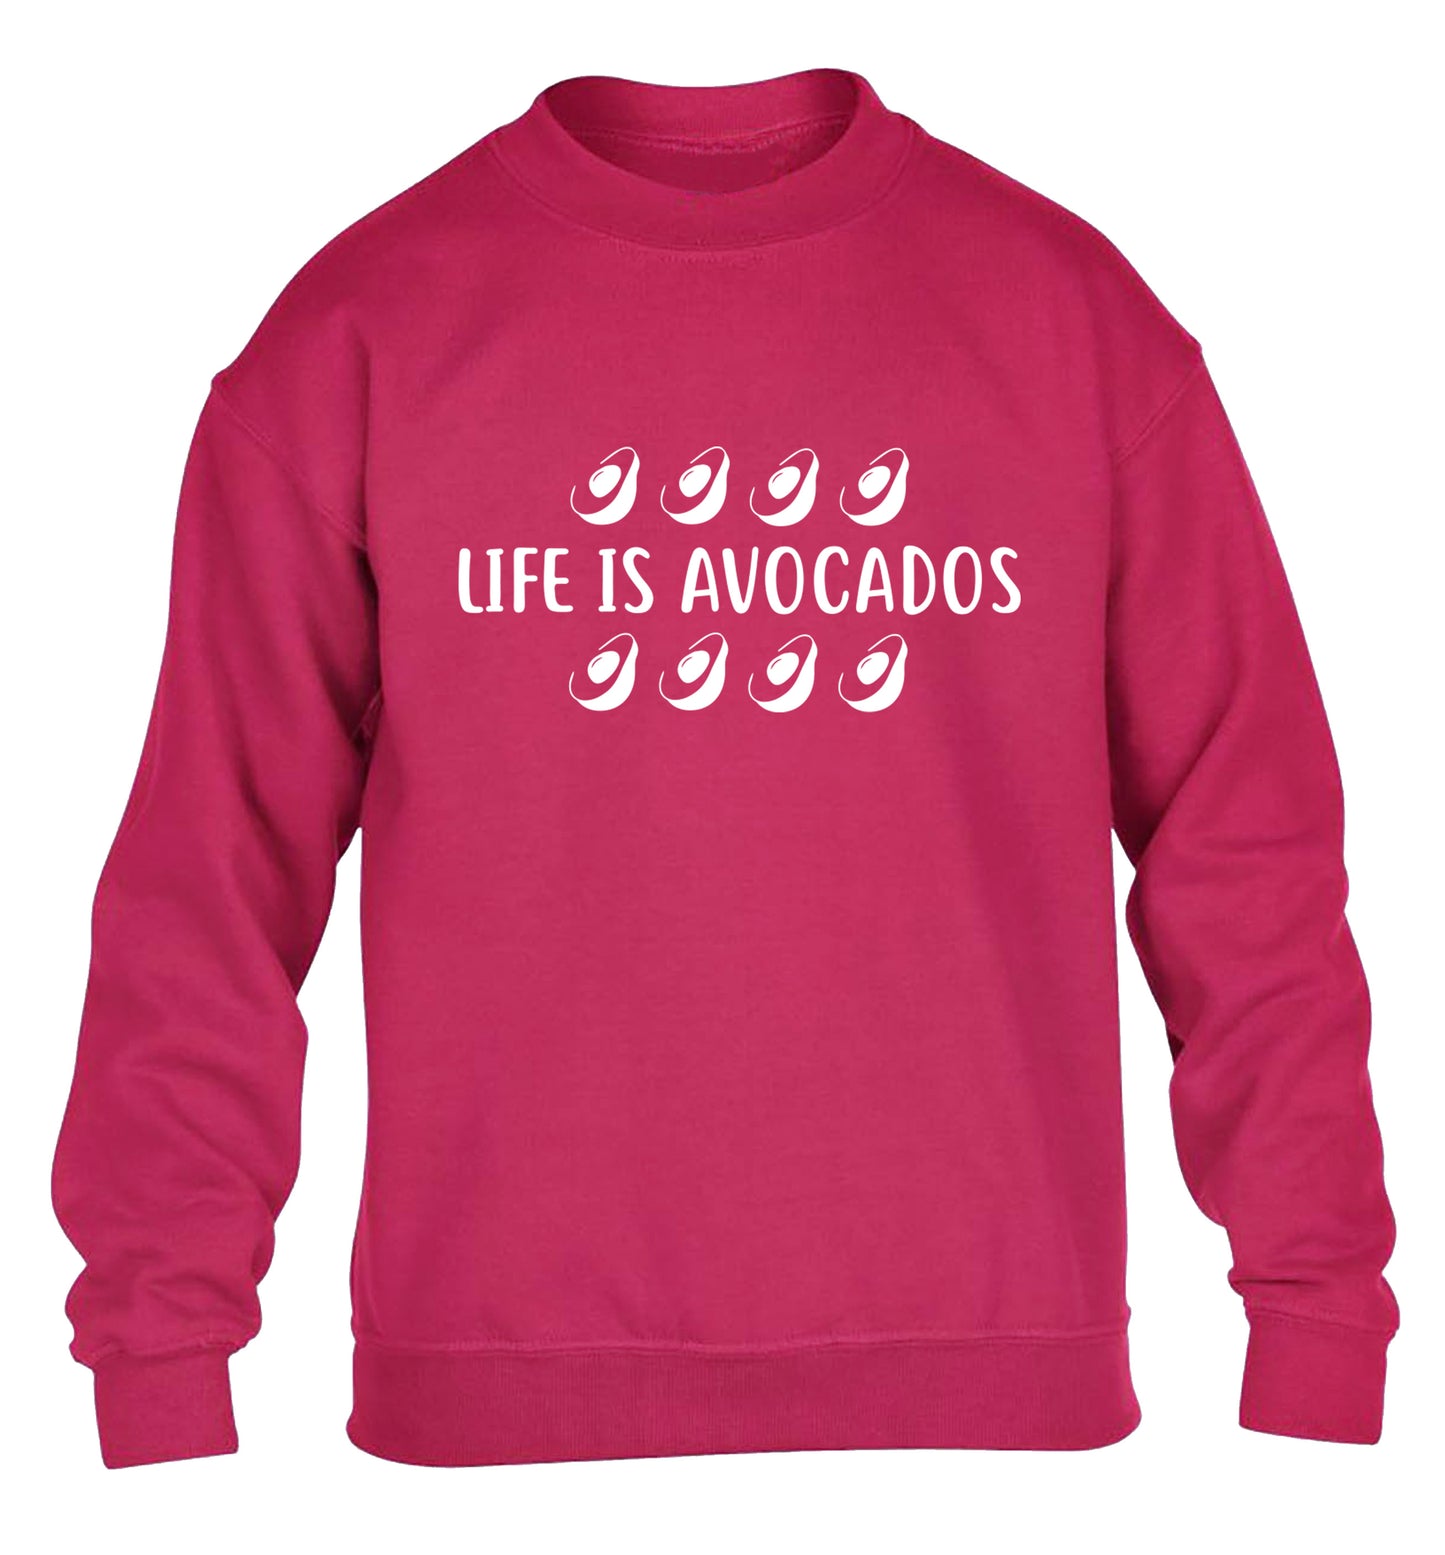 Life is avocados children's pink sweater 12-14 Years